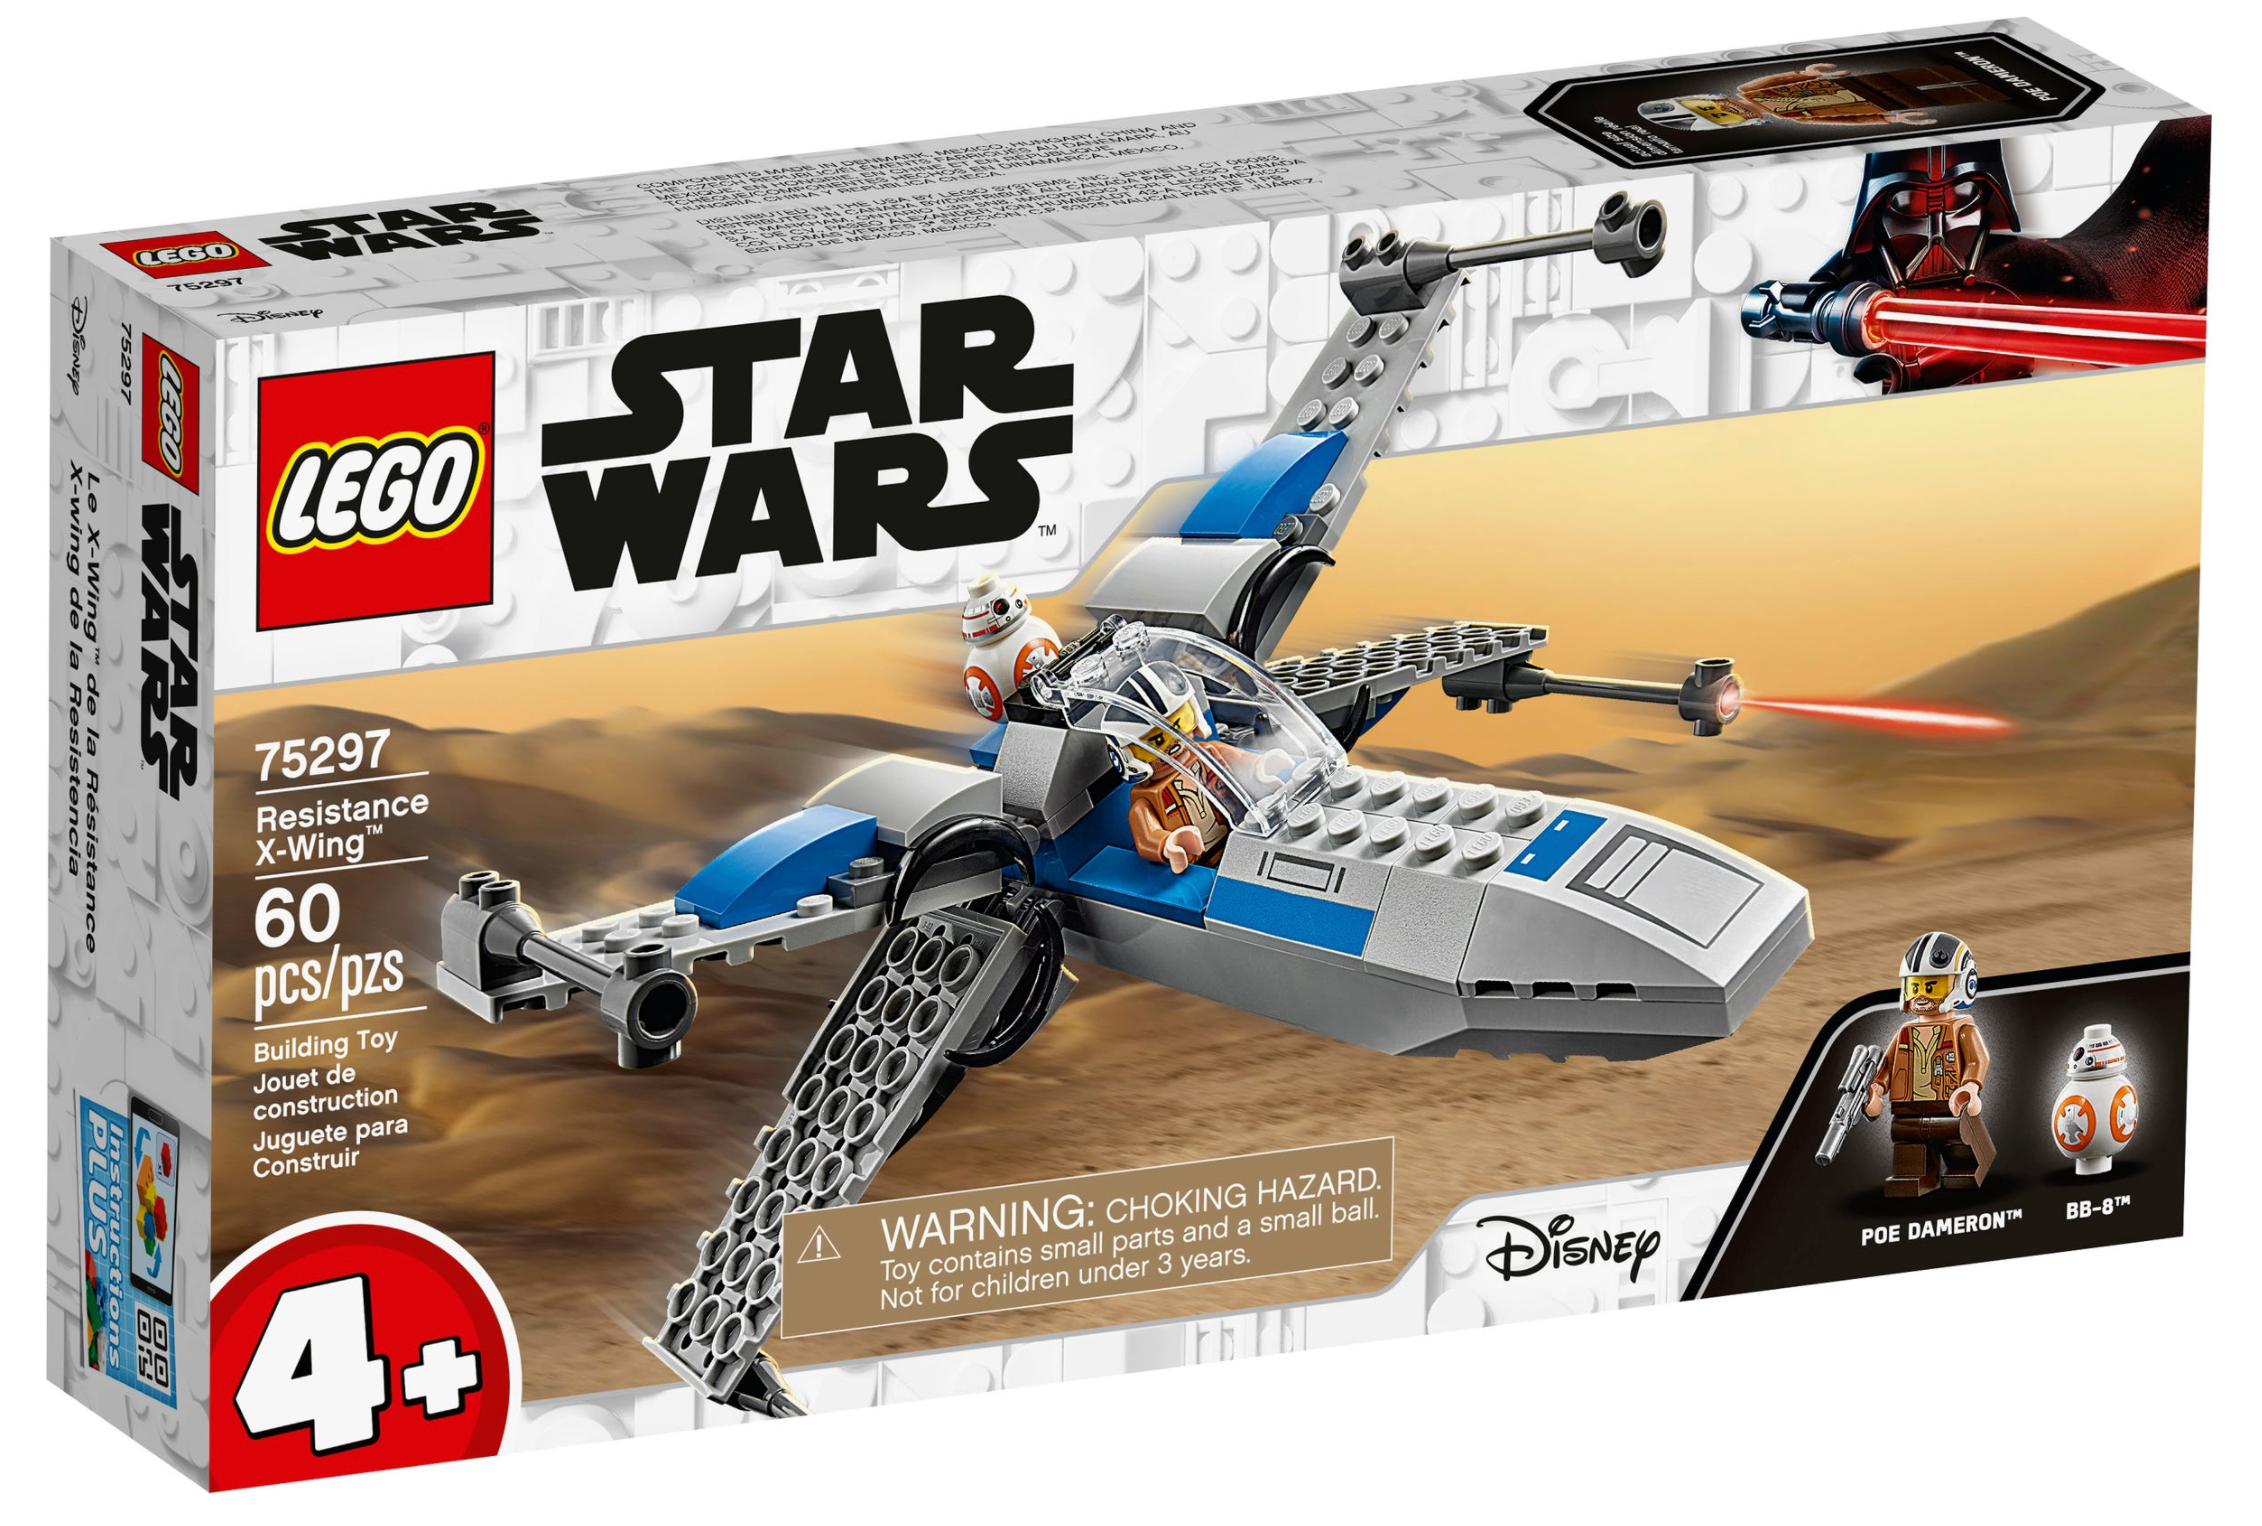 LEGO: Star Wars - Resistance X-Wing™